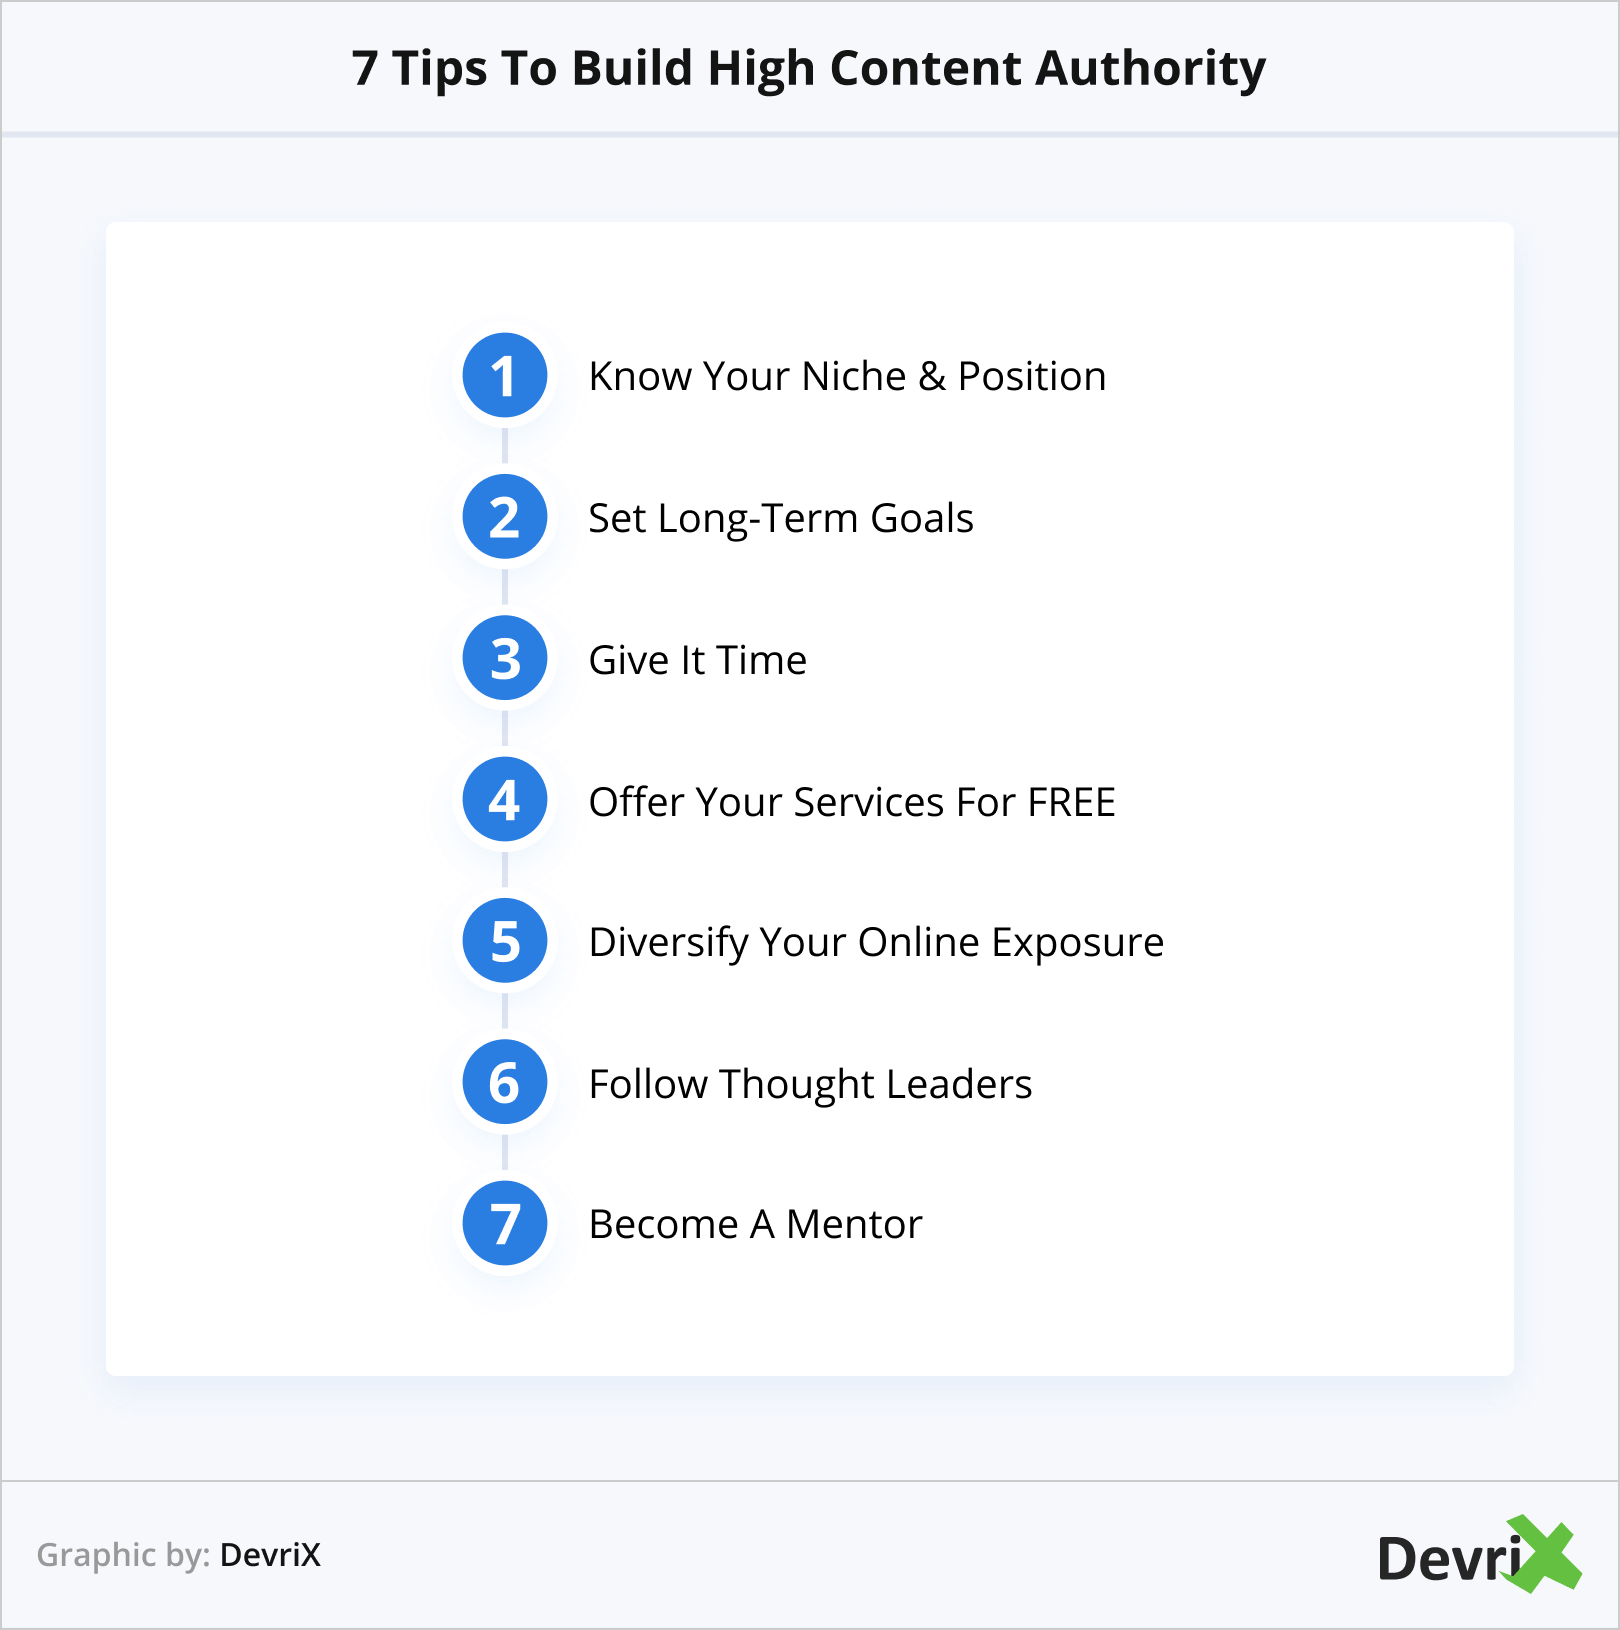 7 Tips To Build High Content Authority